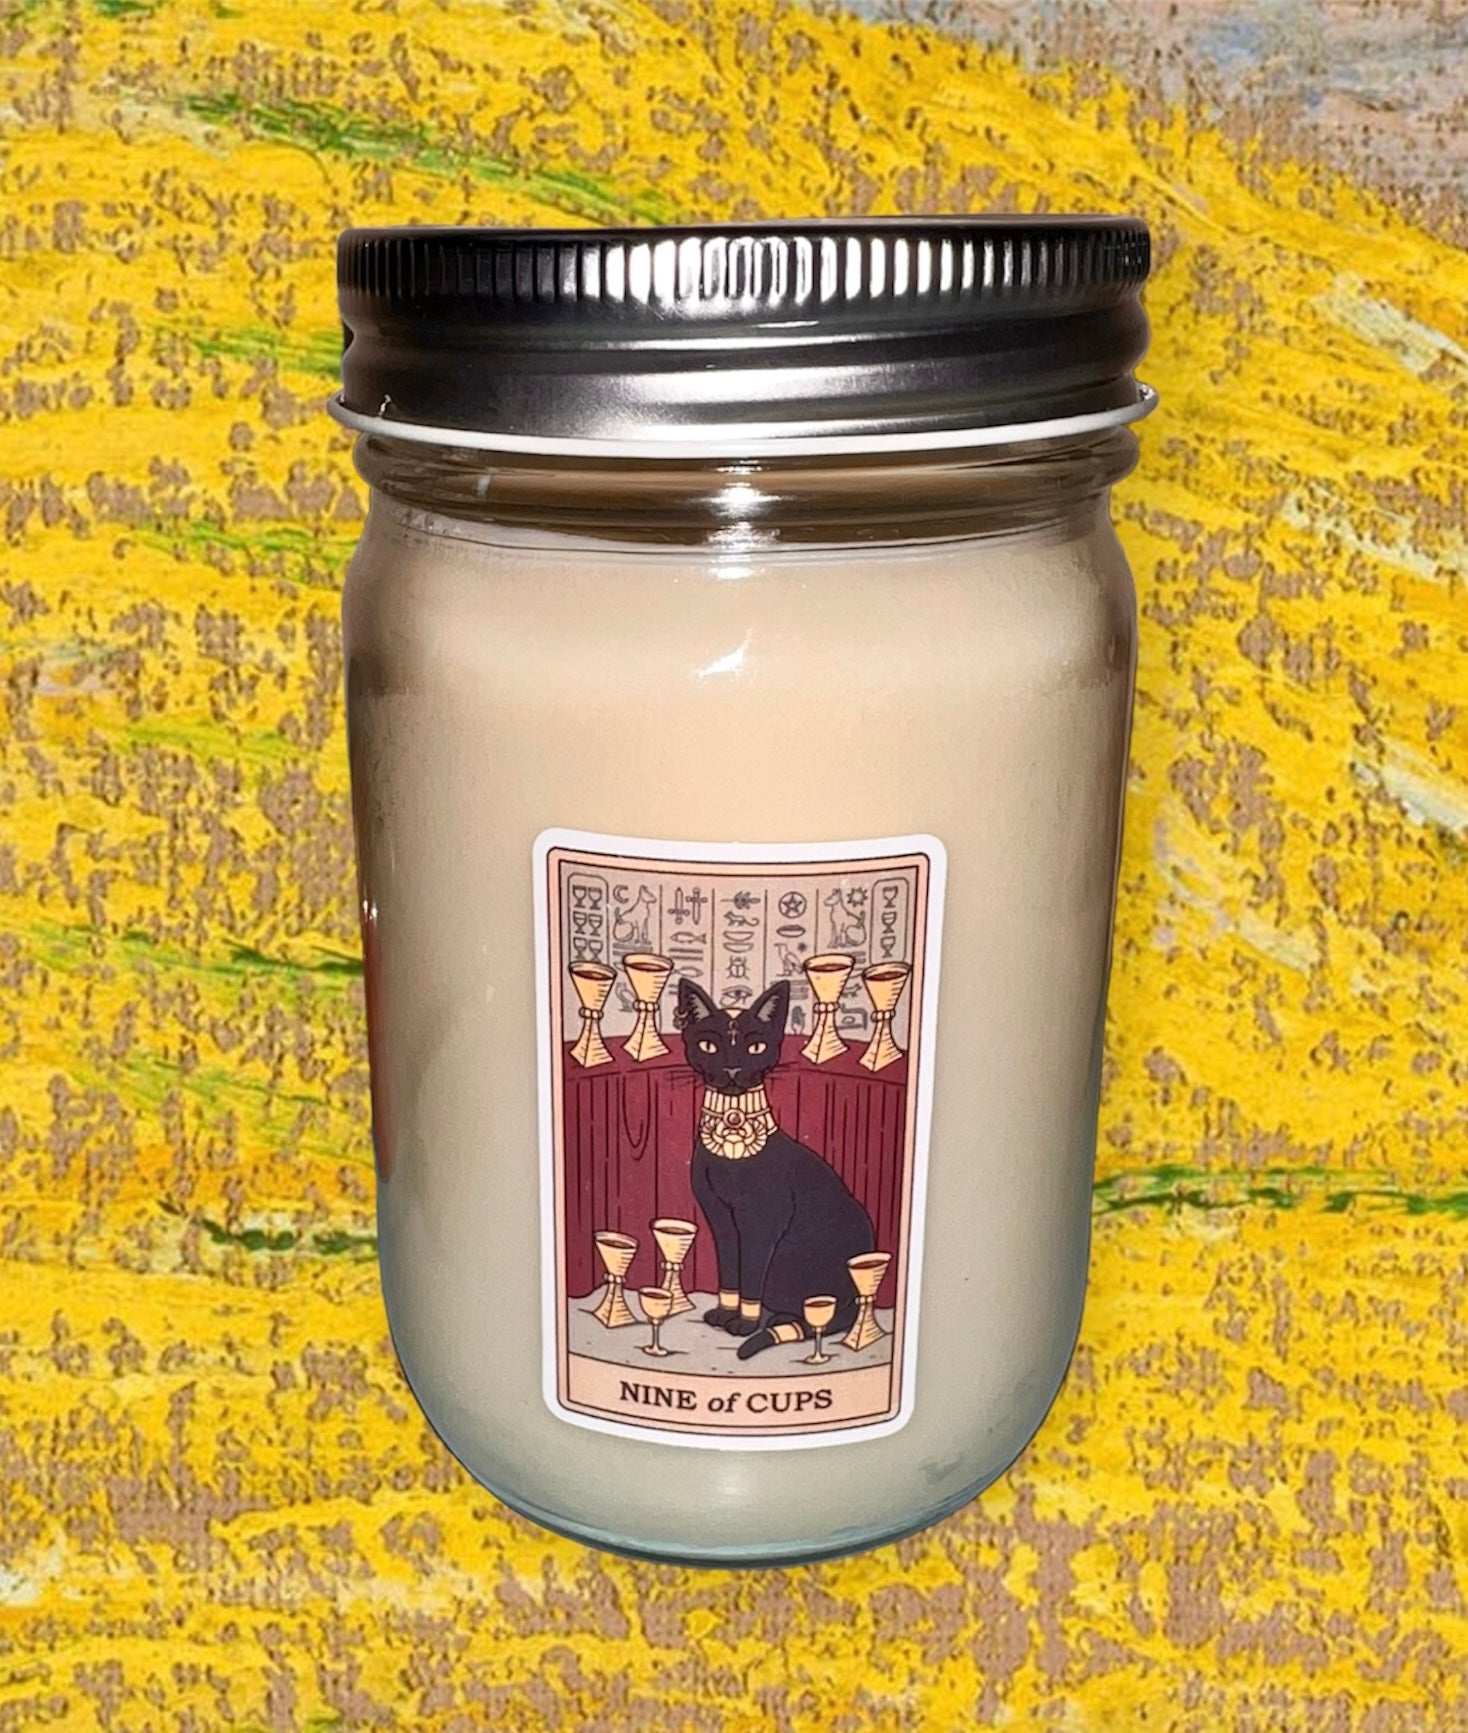 Tarot card scented soy candles for sale online.